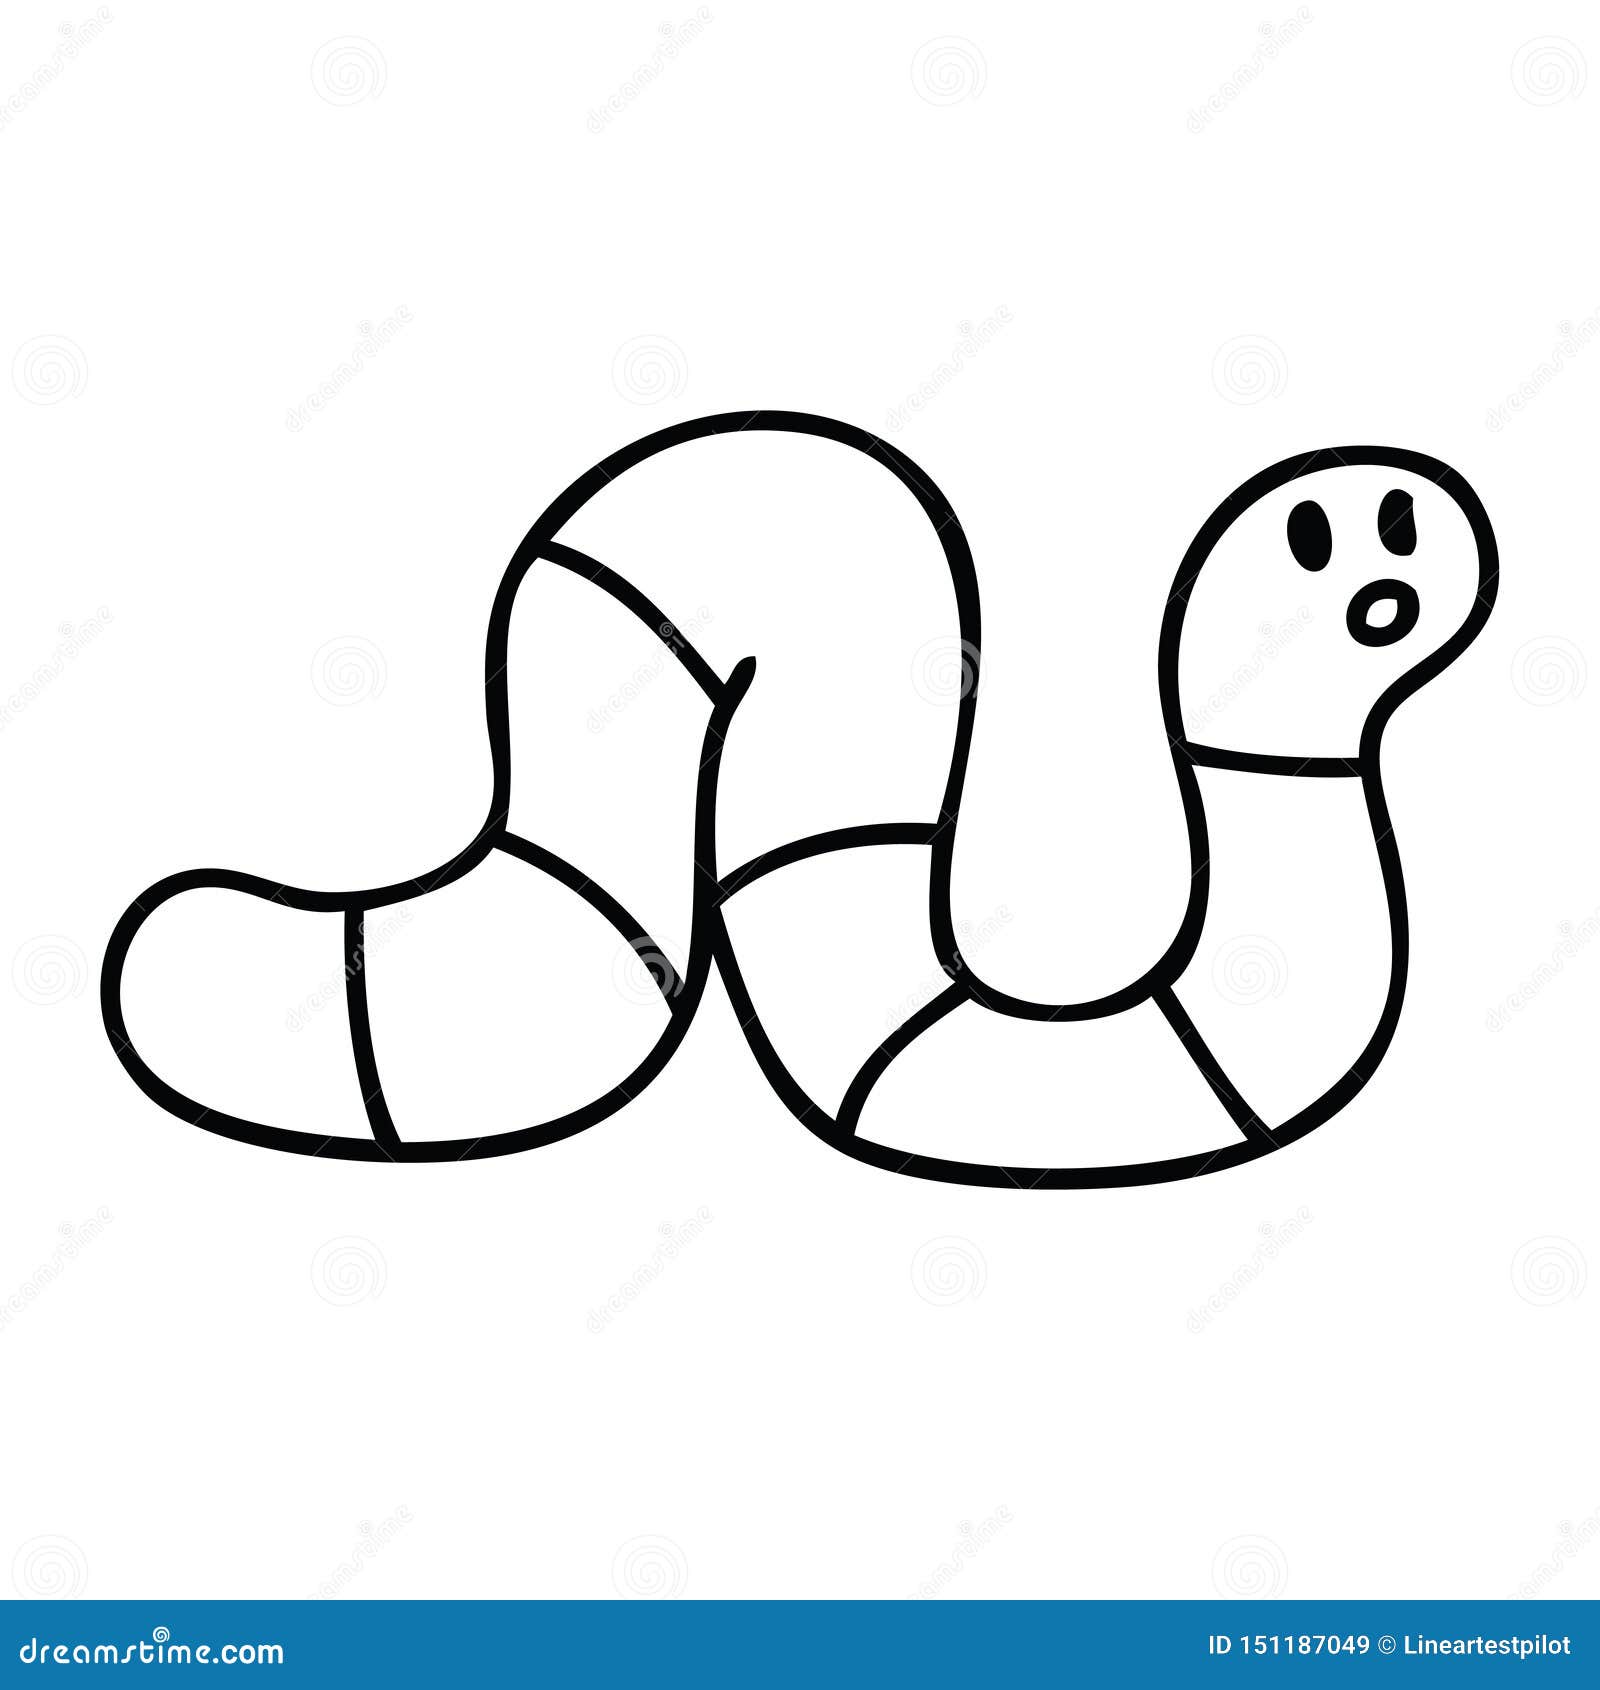 Bug Insect Nature Wildlife Worm Cute Cartoon Character Doodle Drawing  Illustration Art Artwork Funny Crazy Quirky Line Retro Stock Illustrations  – 4 Bug Insect Nature Wildlife Worm Cute Cartoon Character Doodle Drawing